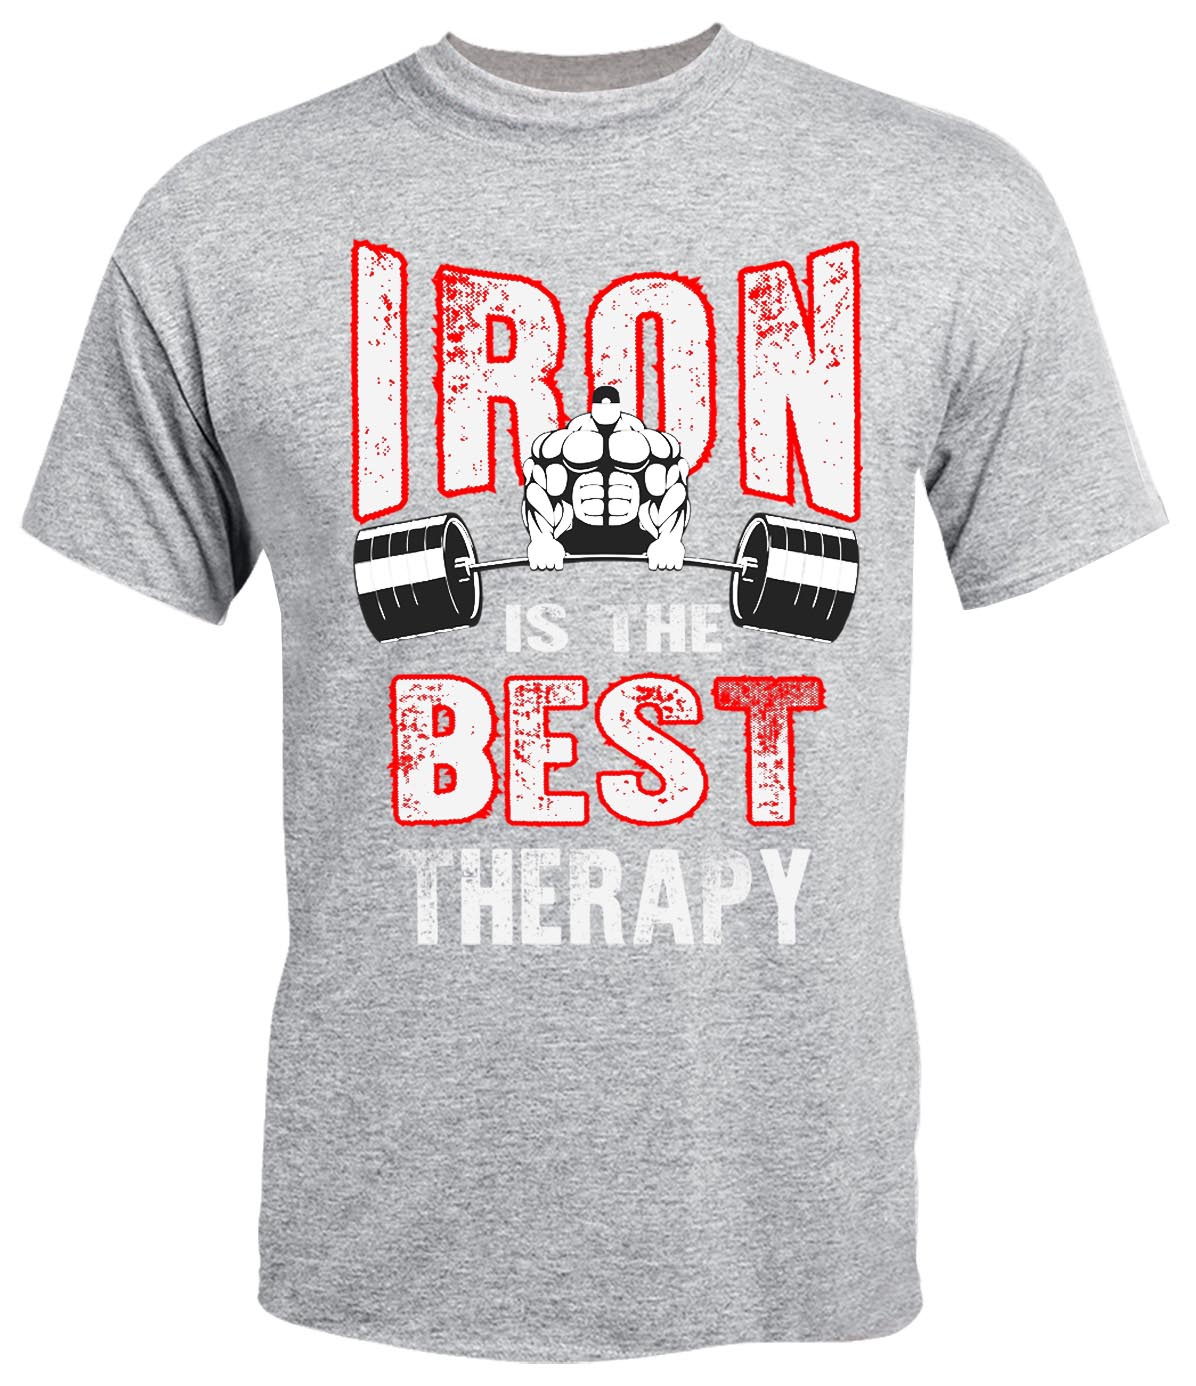 Iron Is The Best Therapy